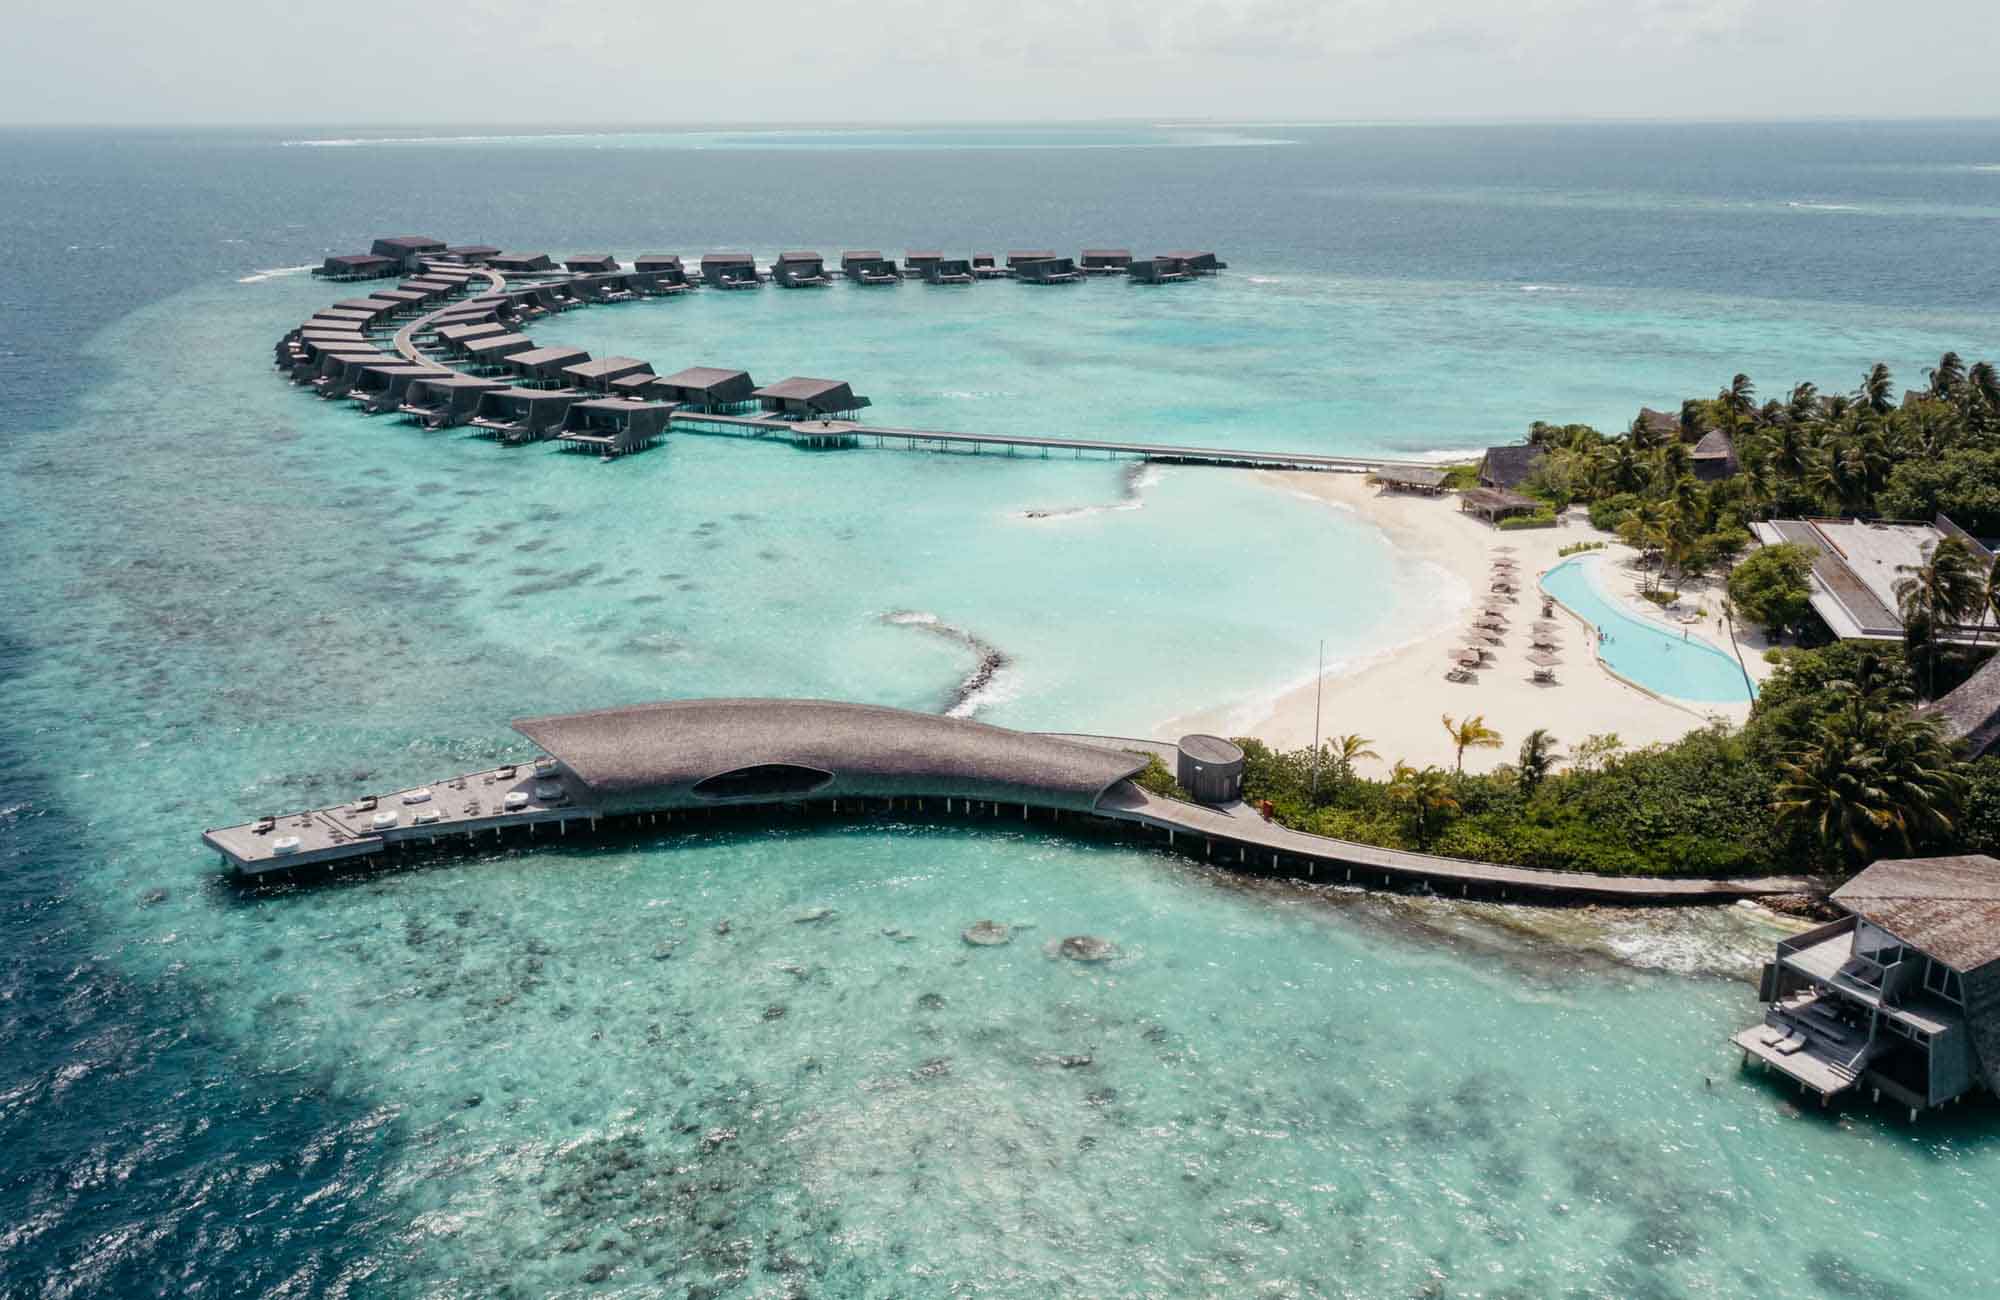  WHAT IT'S REALLY LIKE STAYING AT THE ST REGIS MALDIVES